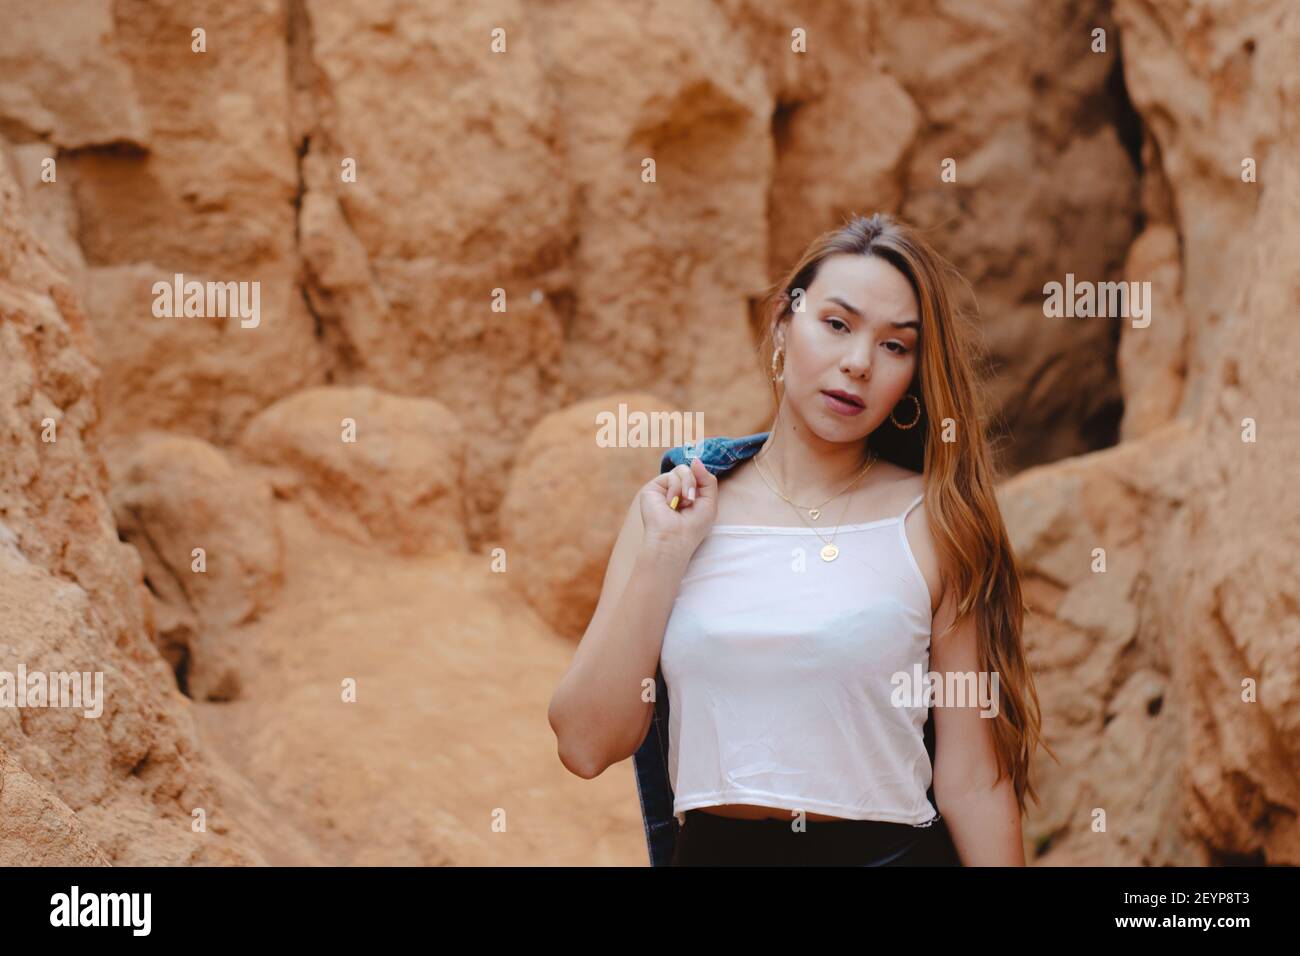 A young attractive female posing on the Sabrinsky desert in Colombia Stock Photo